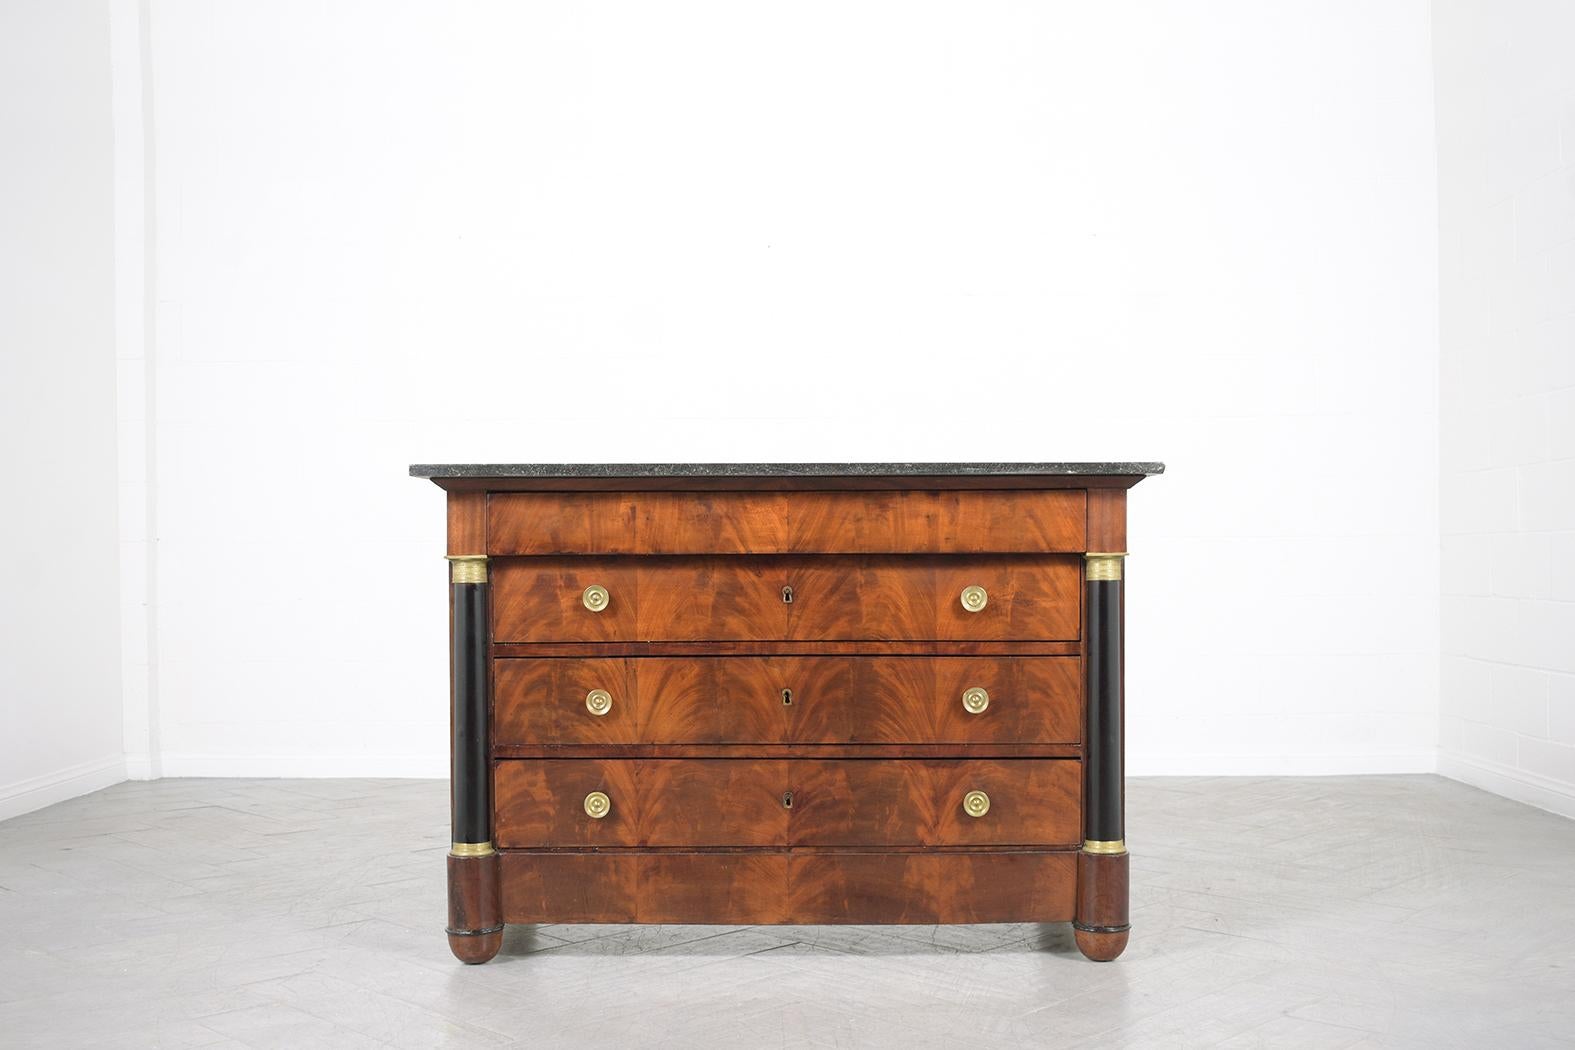 Polished Restored 19th-Century French Empire Marble Mahogany Commode with Brass Details